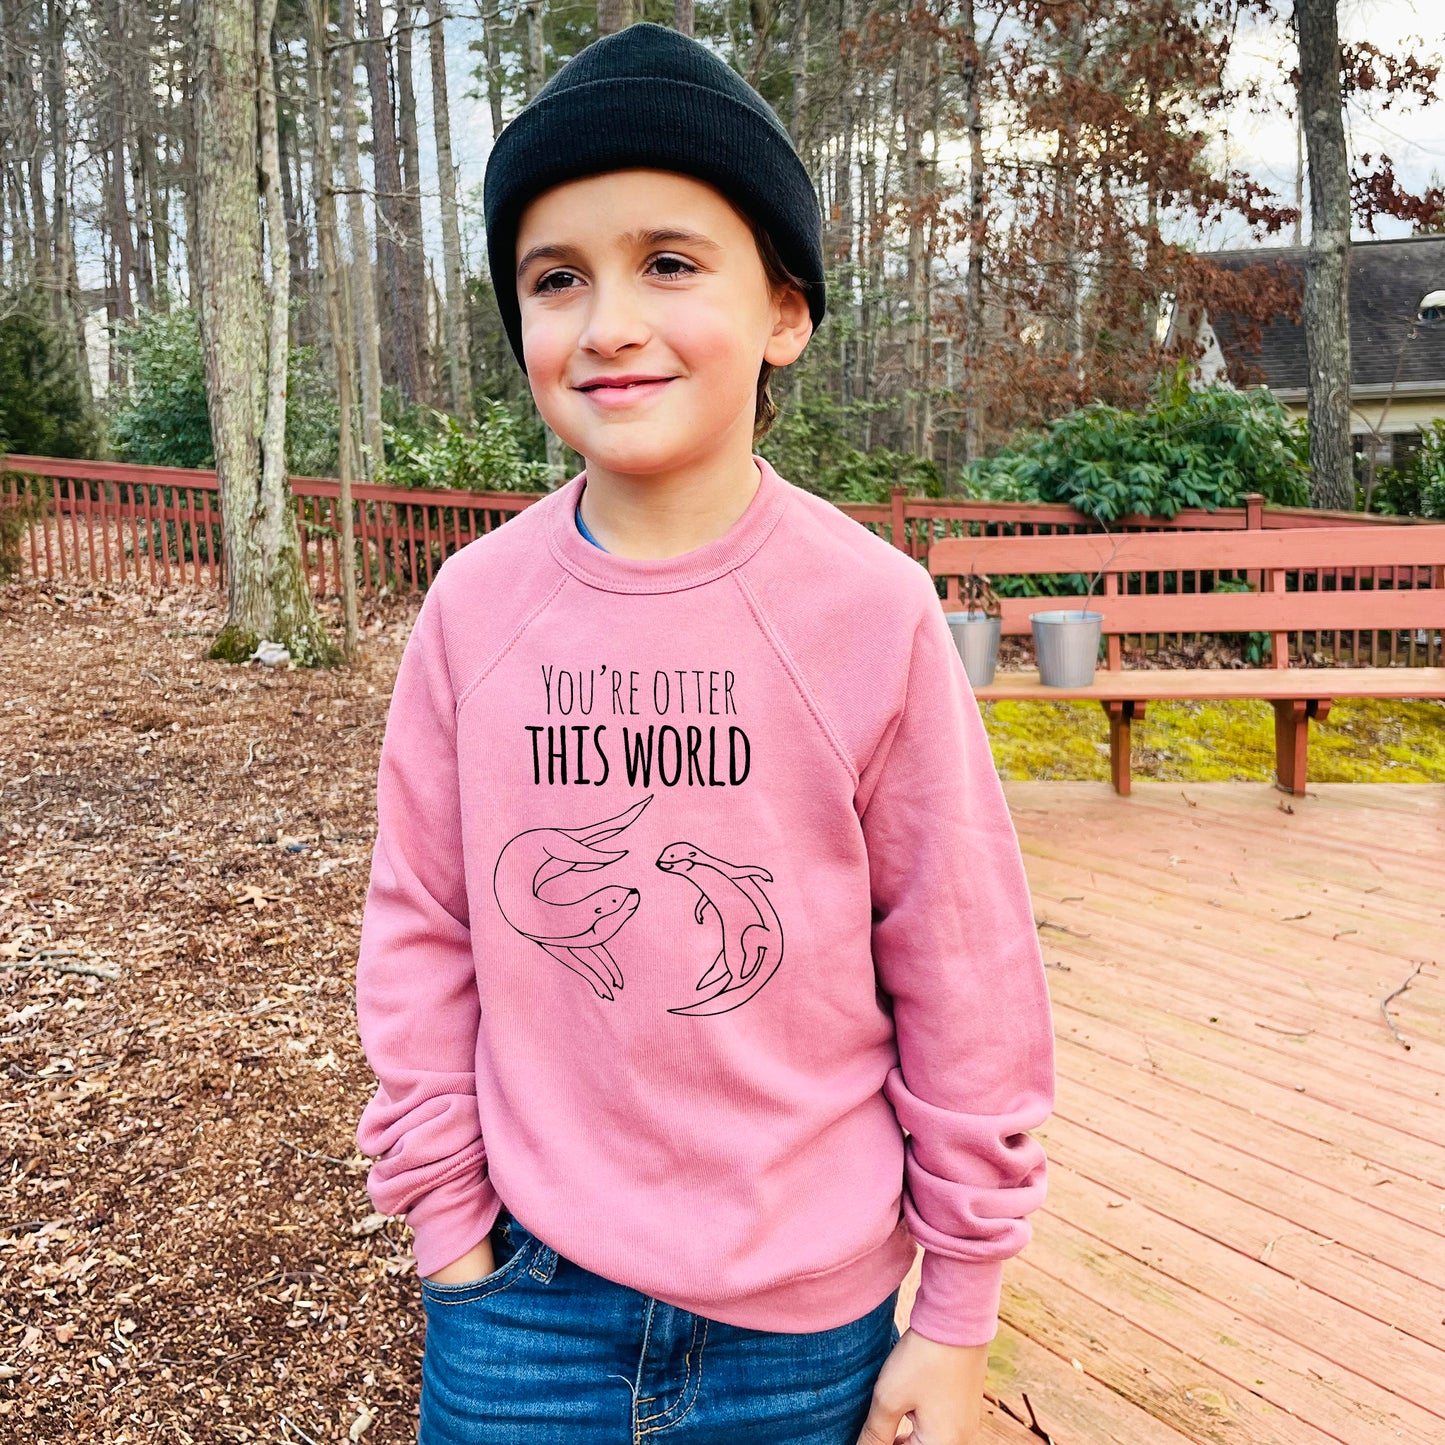 You're Otter This World - Kid's Sweatshirt - Heather Gray or Mauve